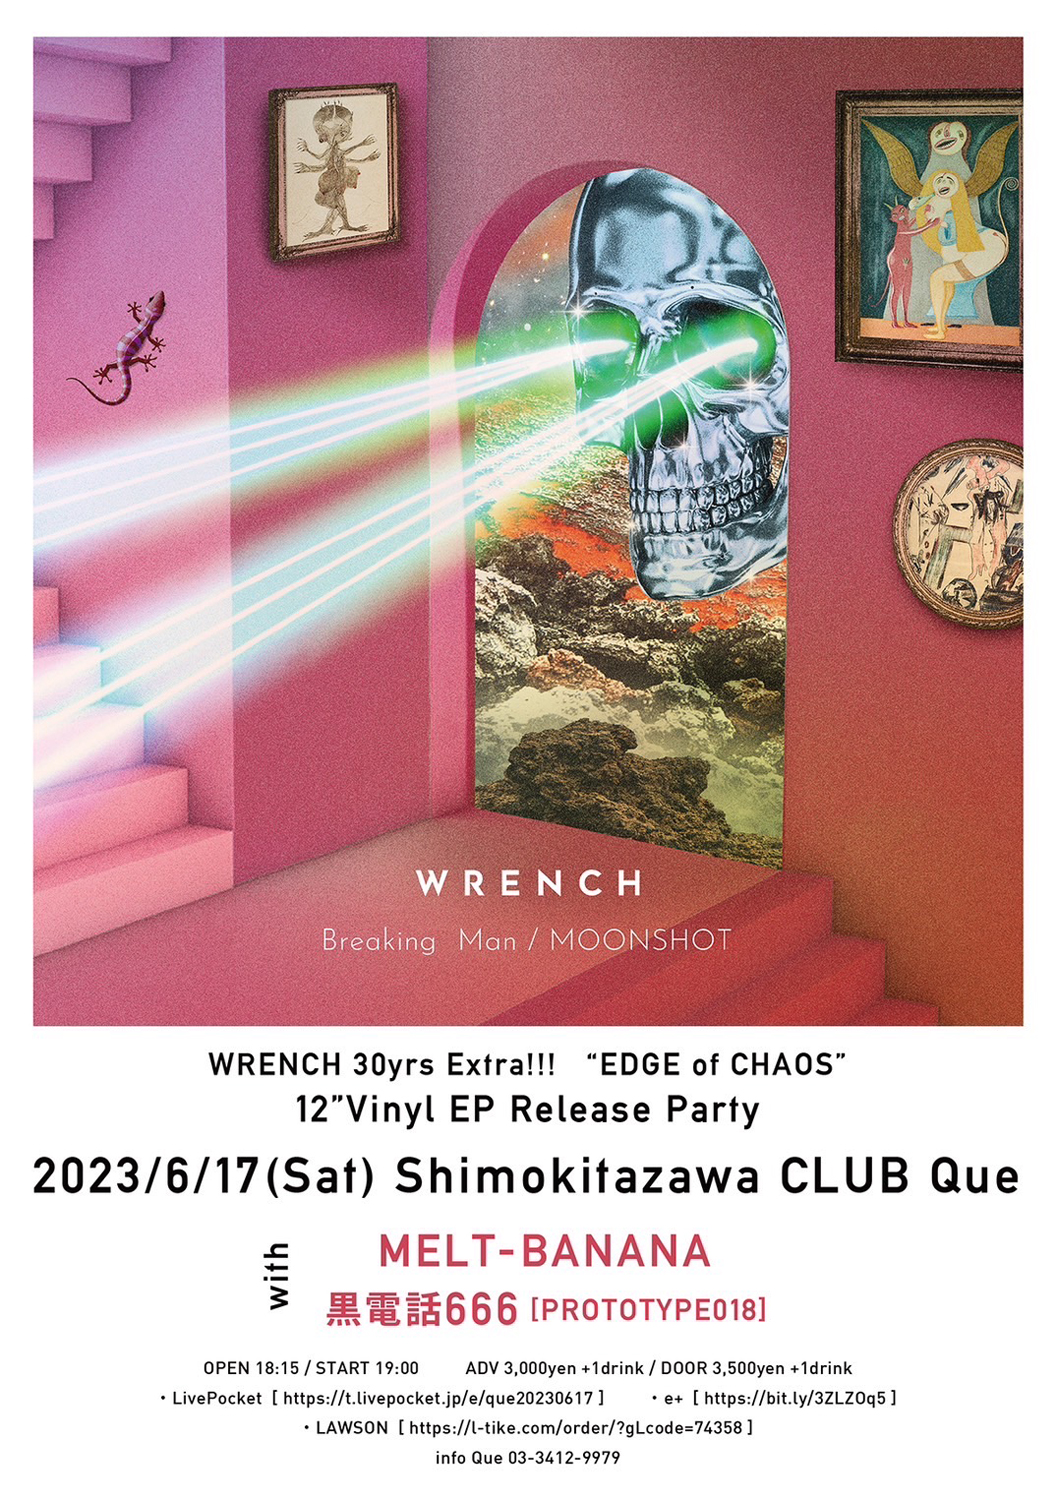 WRENCH 30yrs EXTRA!!! "EDGE of CHAOS" 12" Vinyl EP Release Party